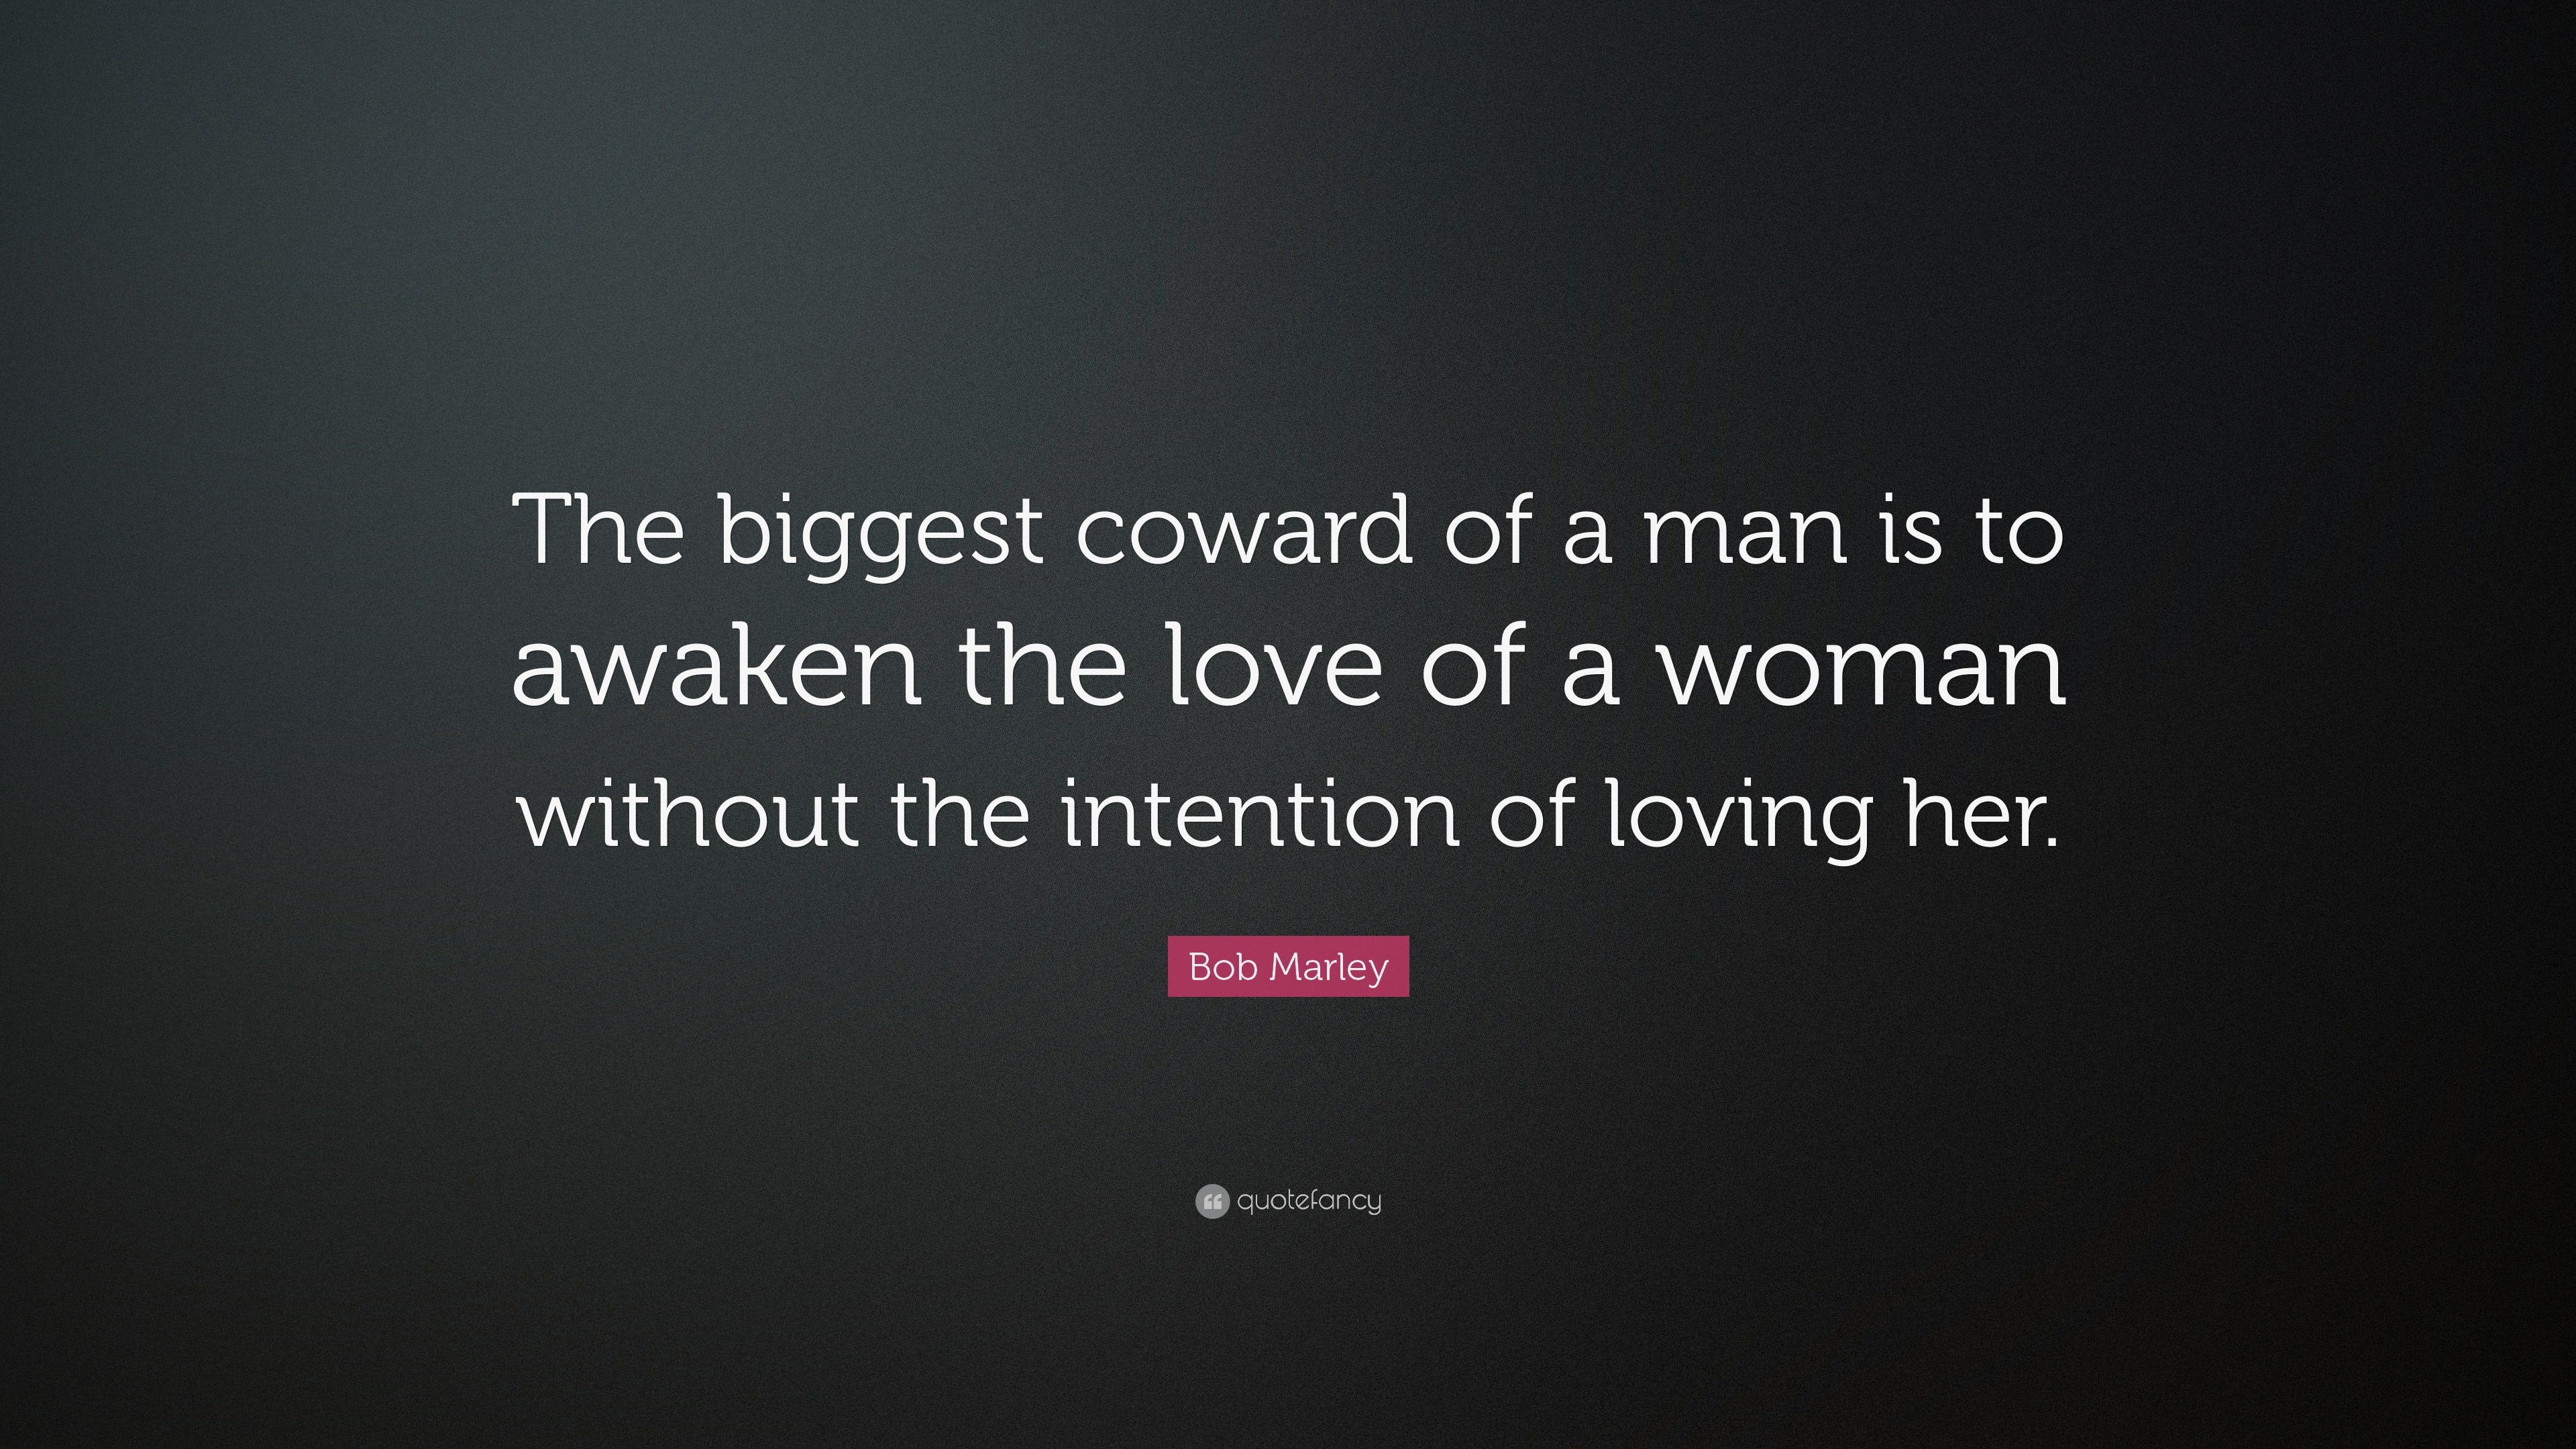 Bob Marley Quote “The biggest coward of a man is to awaken the love